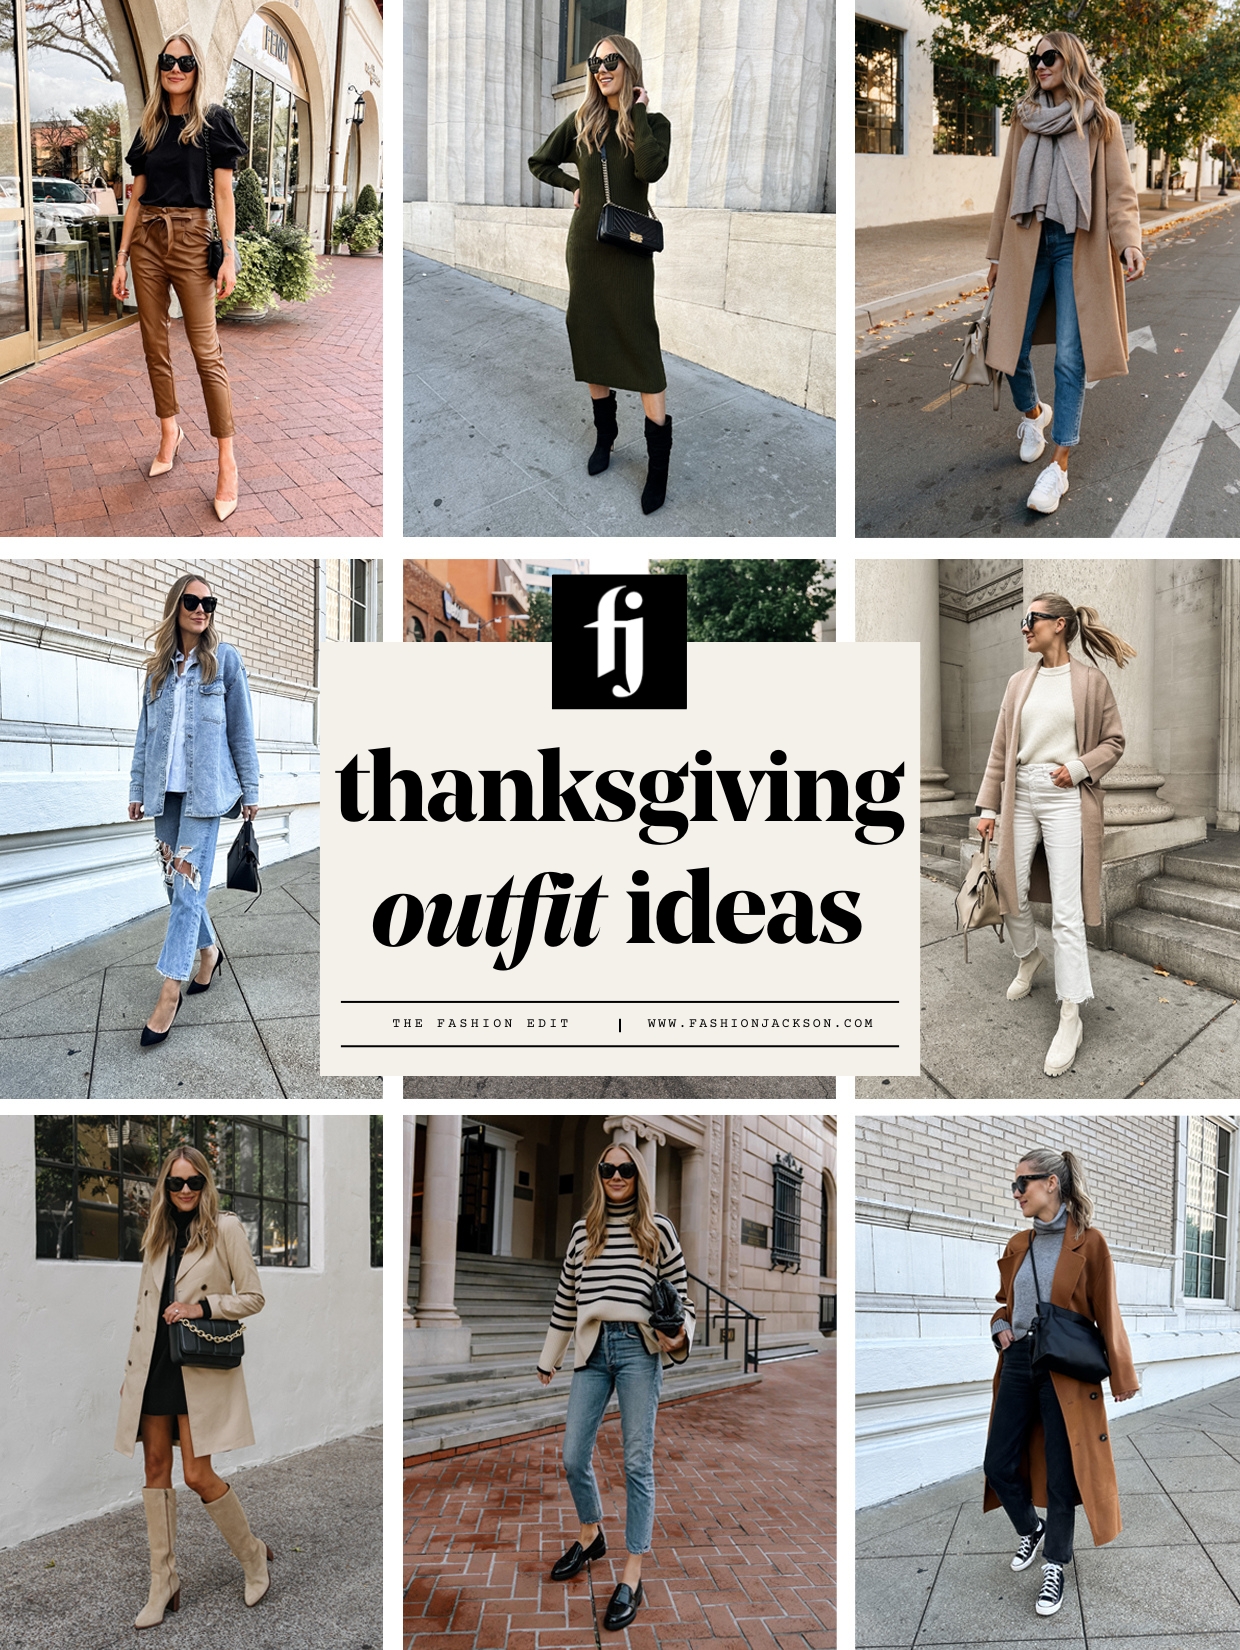 17 Outfit Ideas To Be the Best Dressed Guest for Thanksgiving - Fashion  Jackson